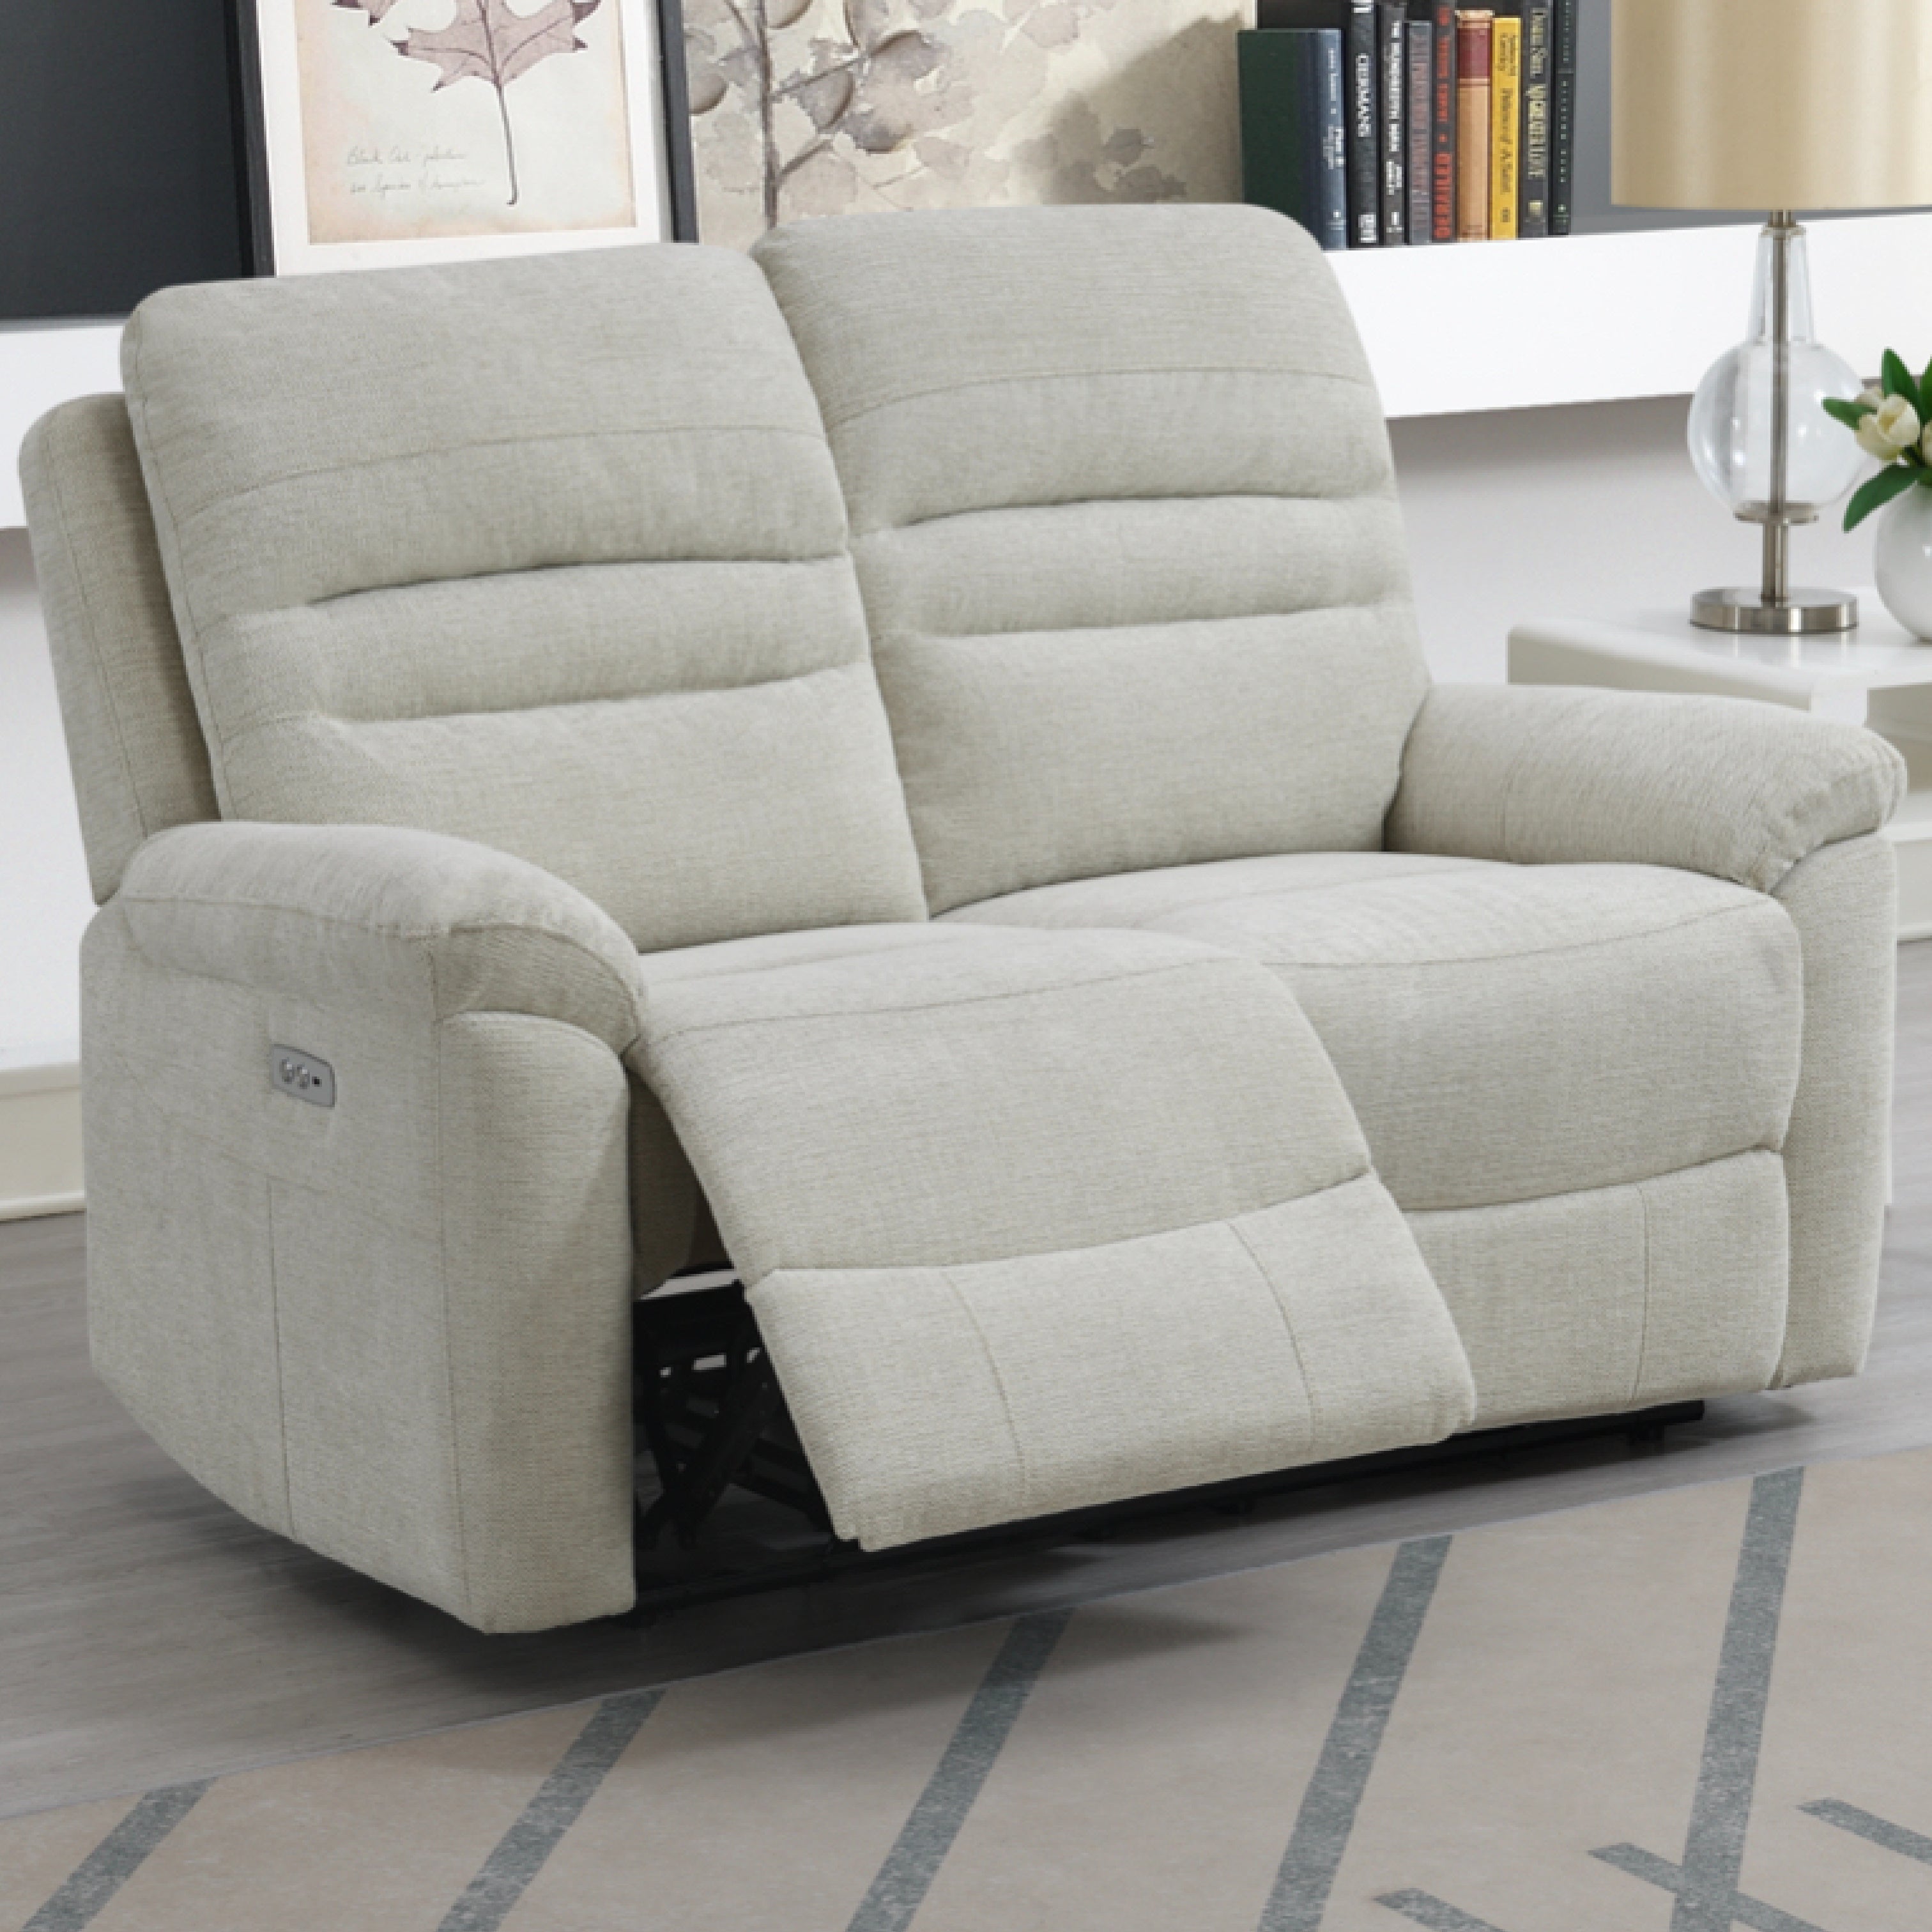 Belford Sofa - 2 Seater - Electric Recliner - Beige | The Oak Outlet Co.